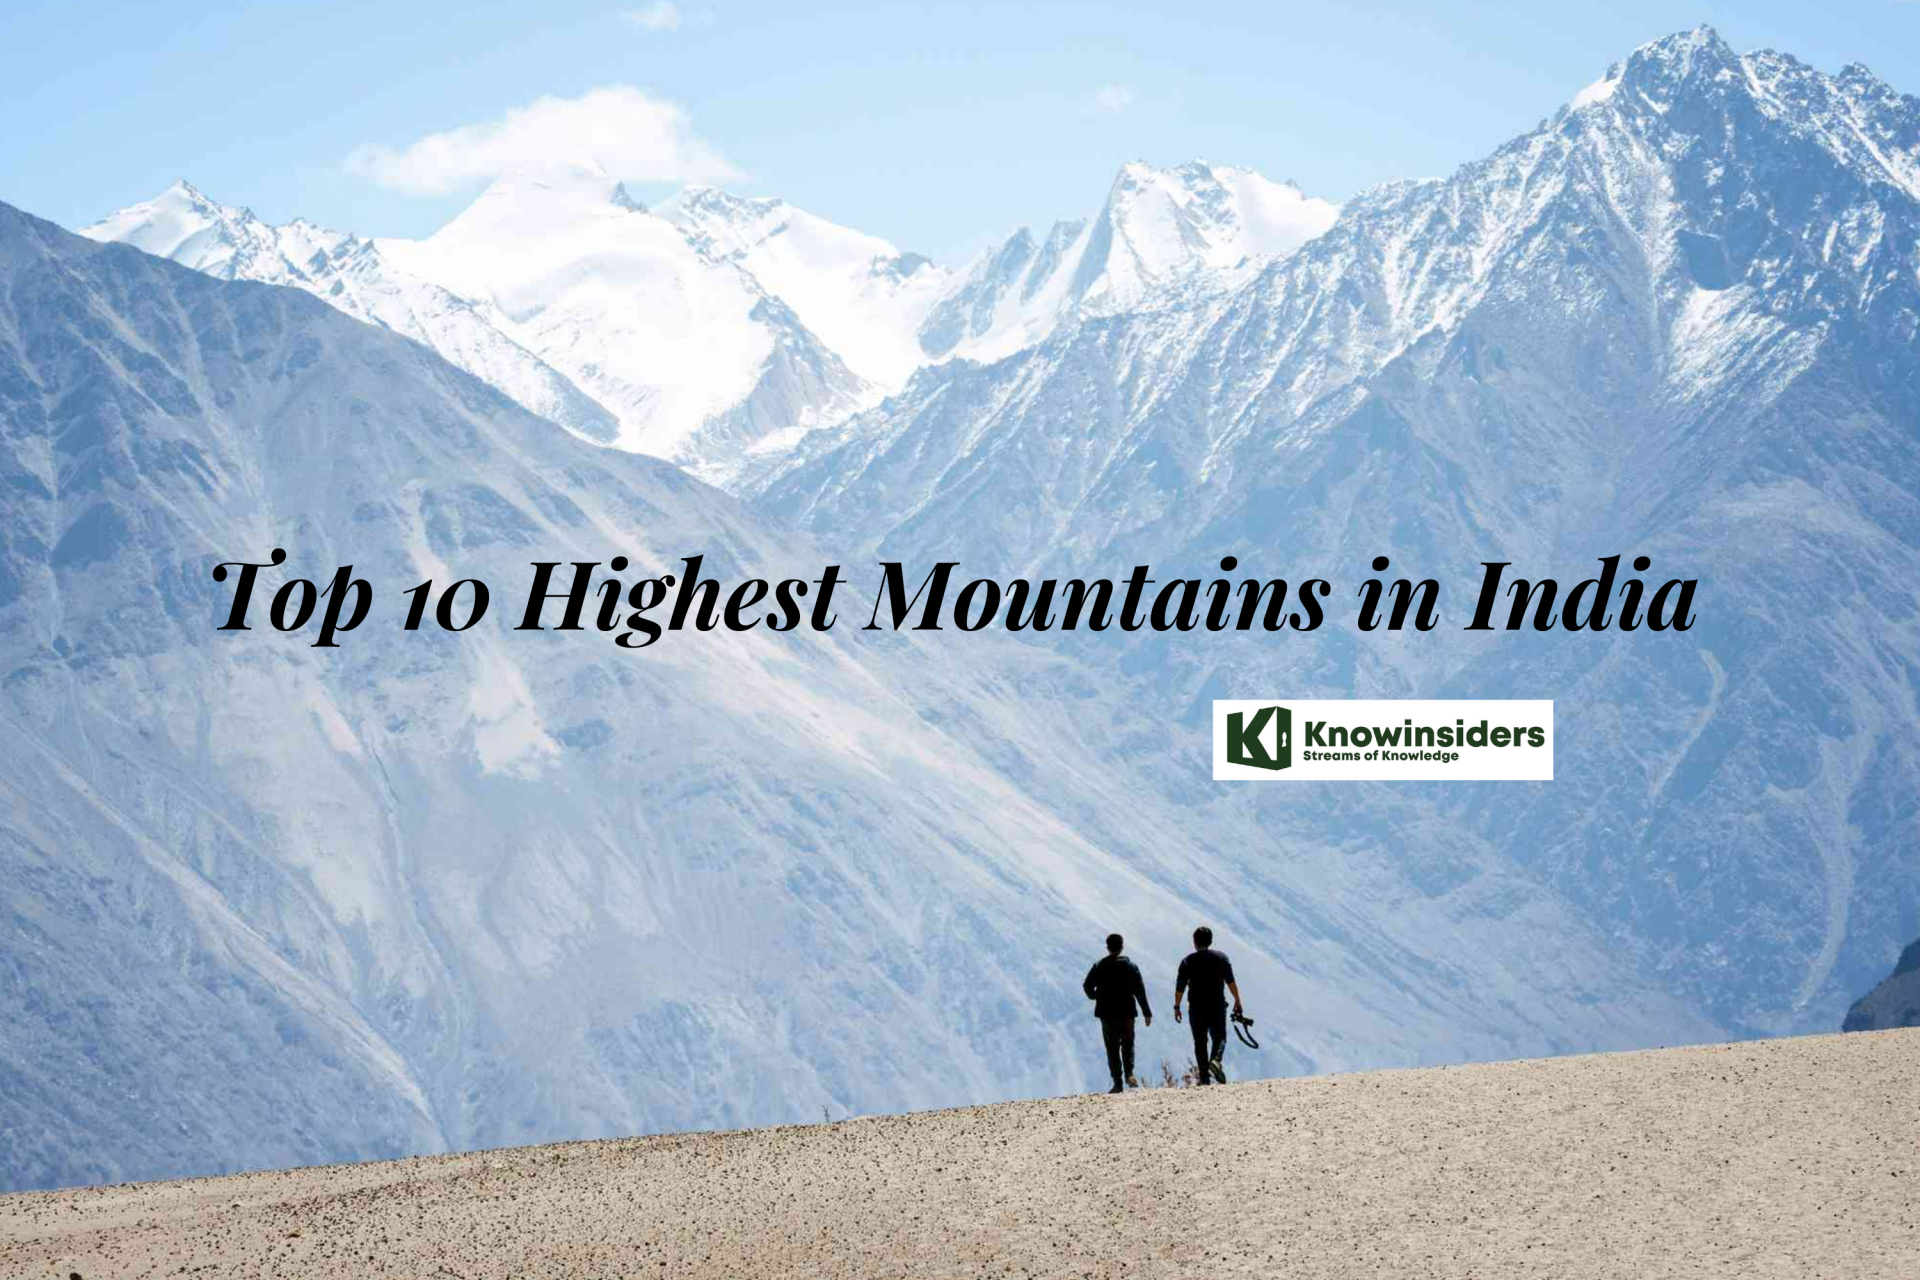 Top 10 Highest Mountains in India